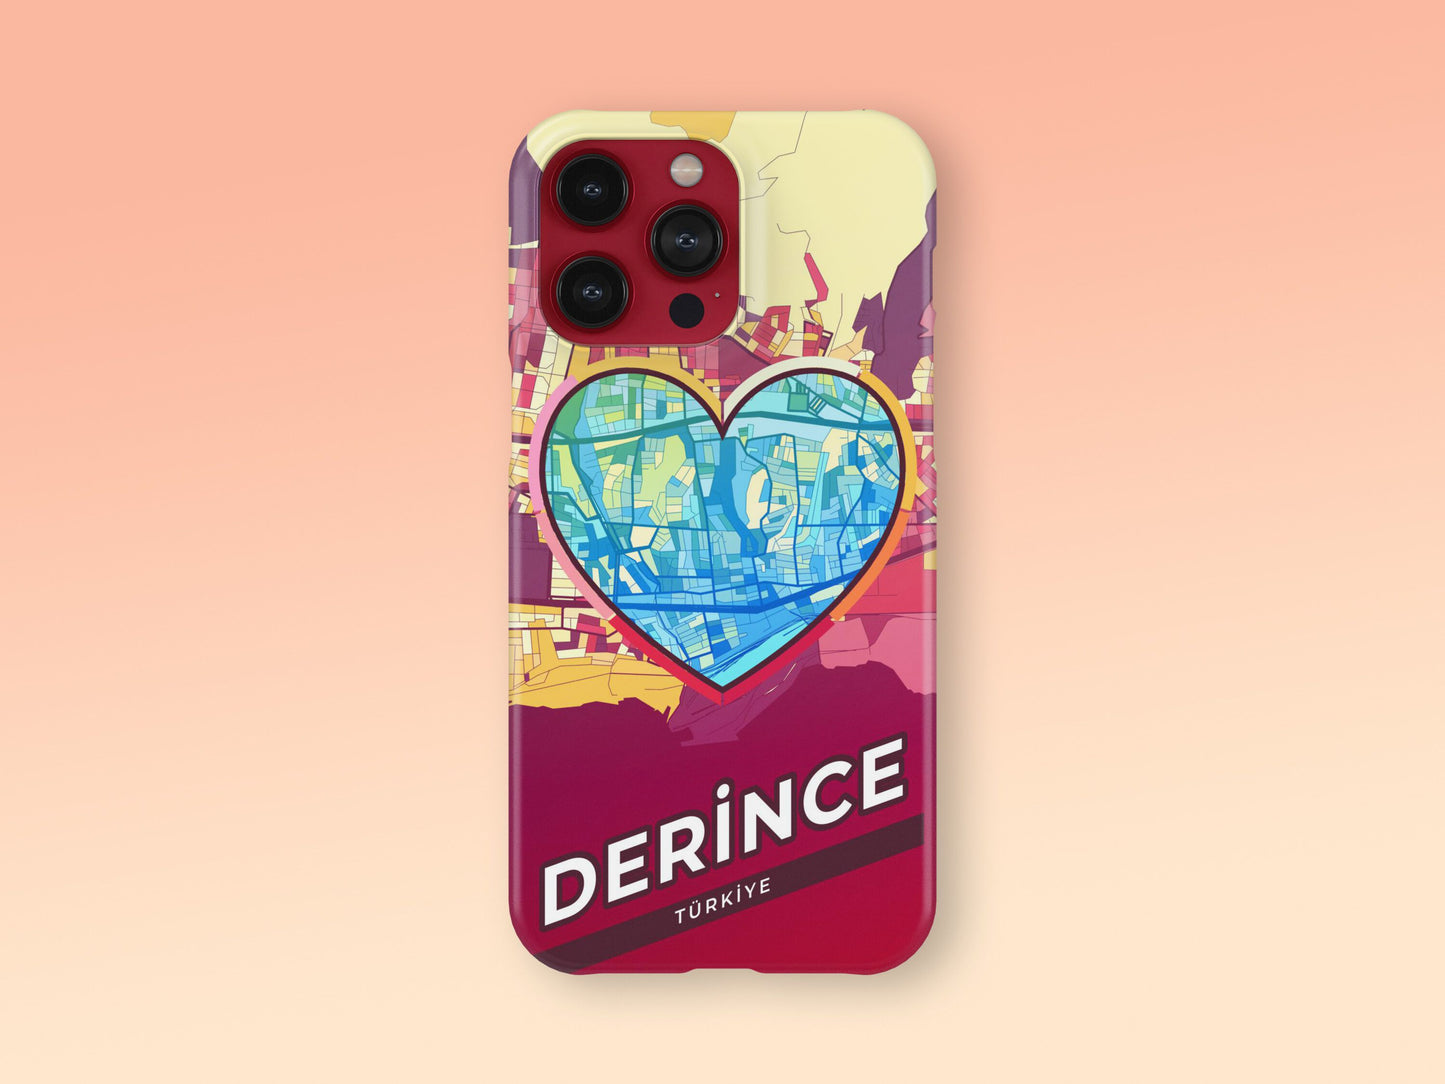 Derince Turkey slim phone case with colorful icon. Birthday, wedding or housewarming gift. Couple match cases. 2